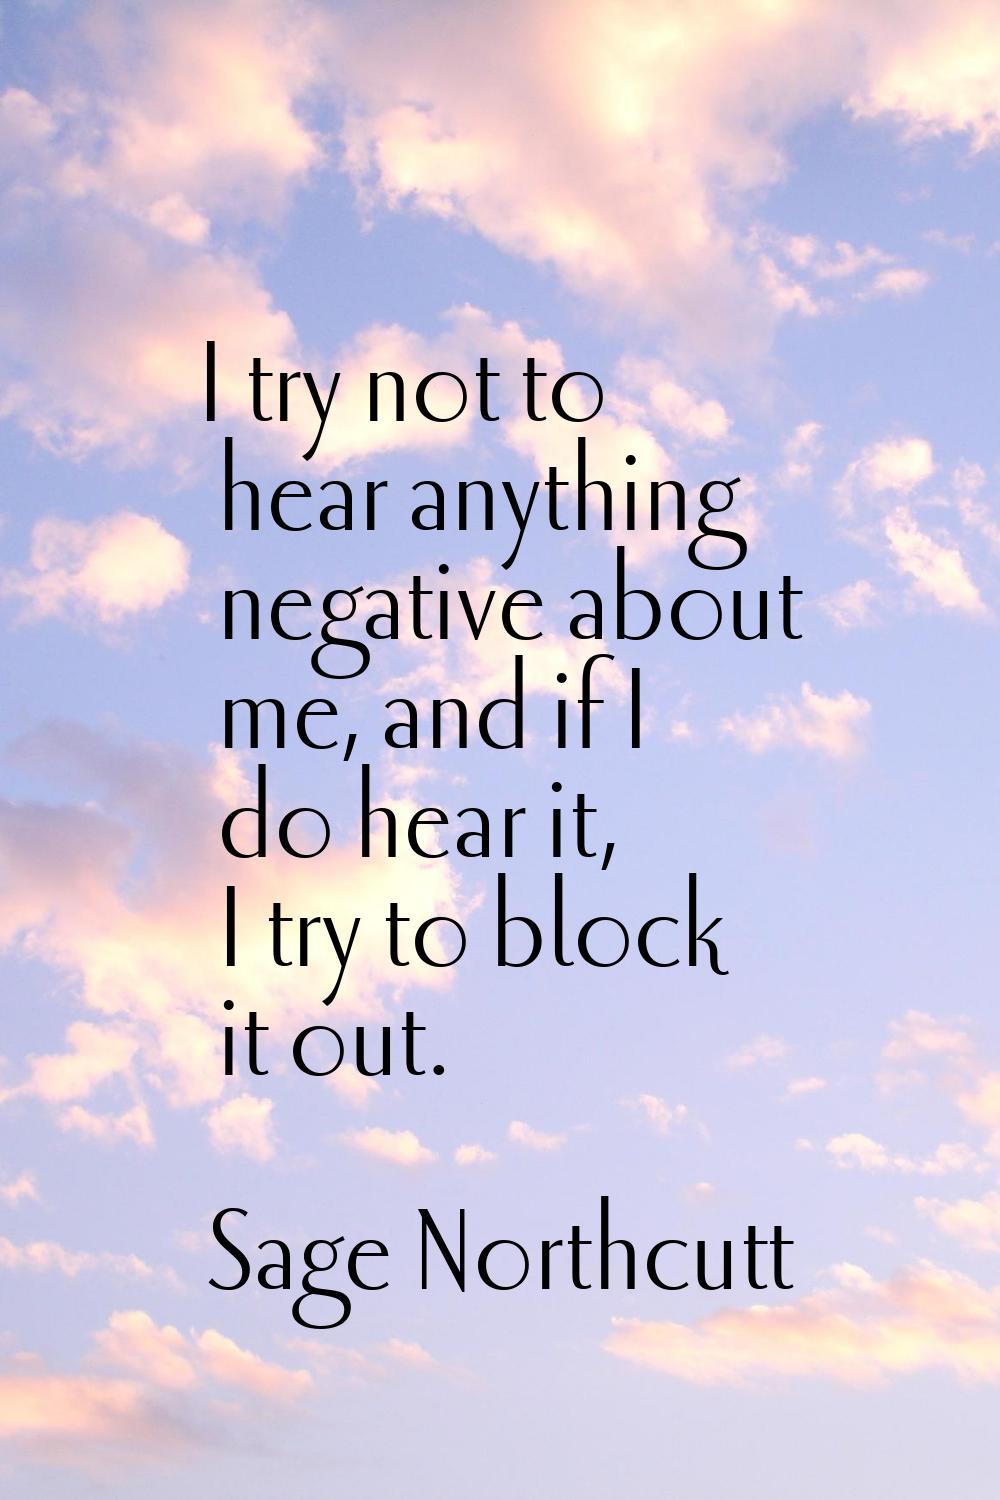 I try not to hear anything negative about me, and if I do hear it, I try to block it out.